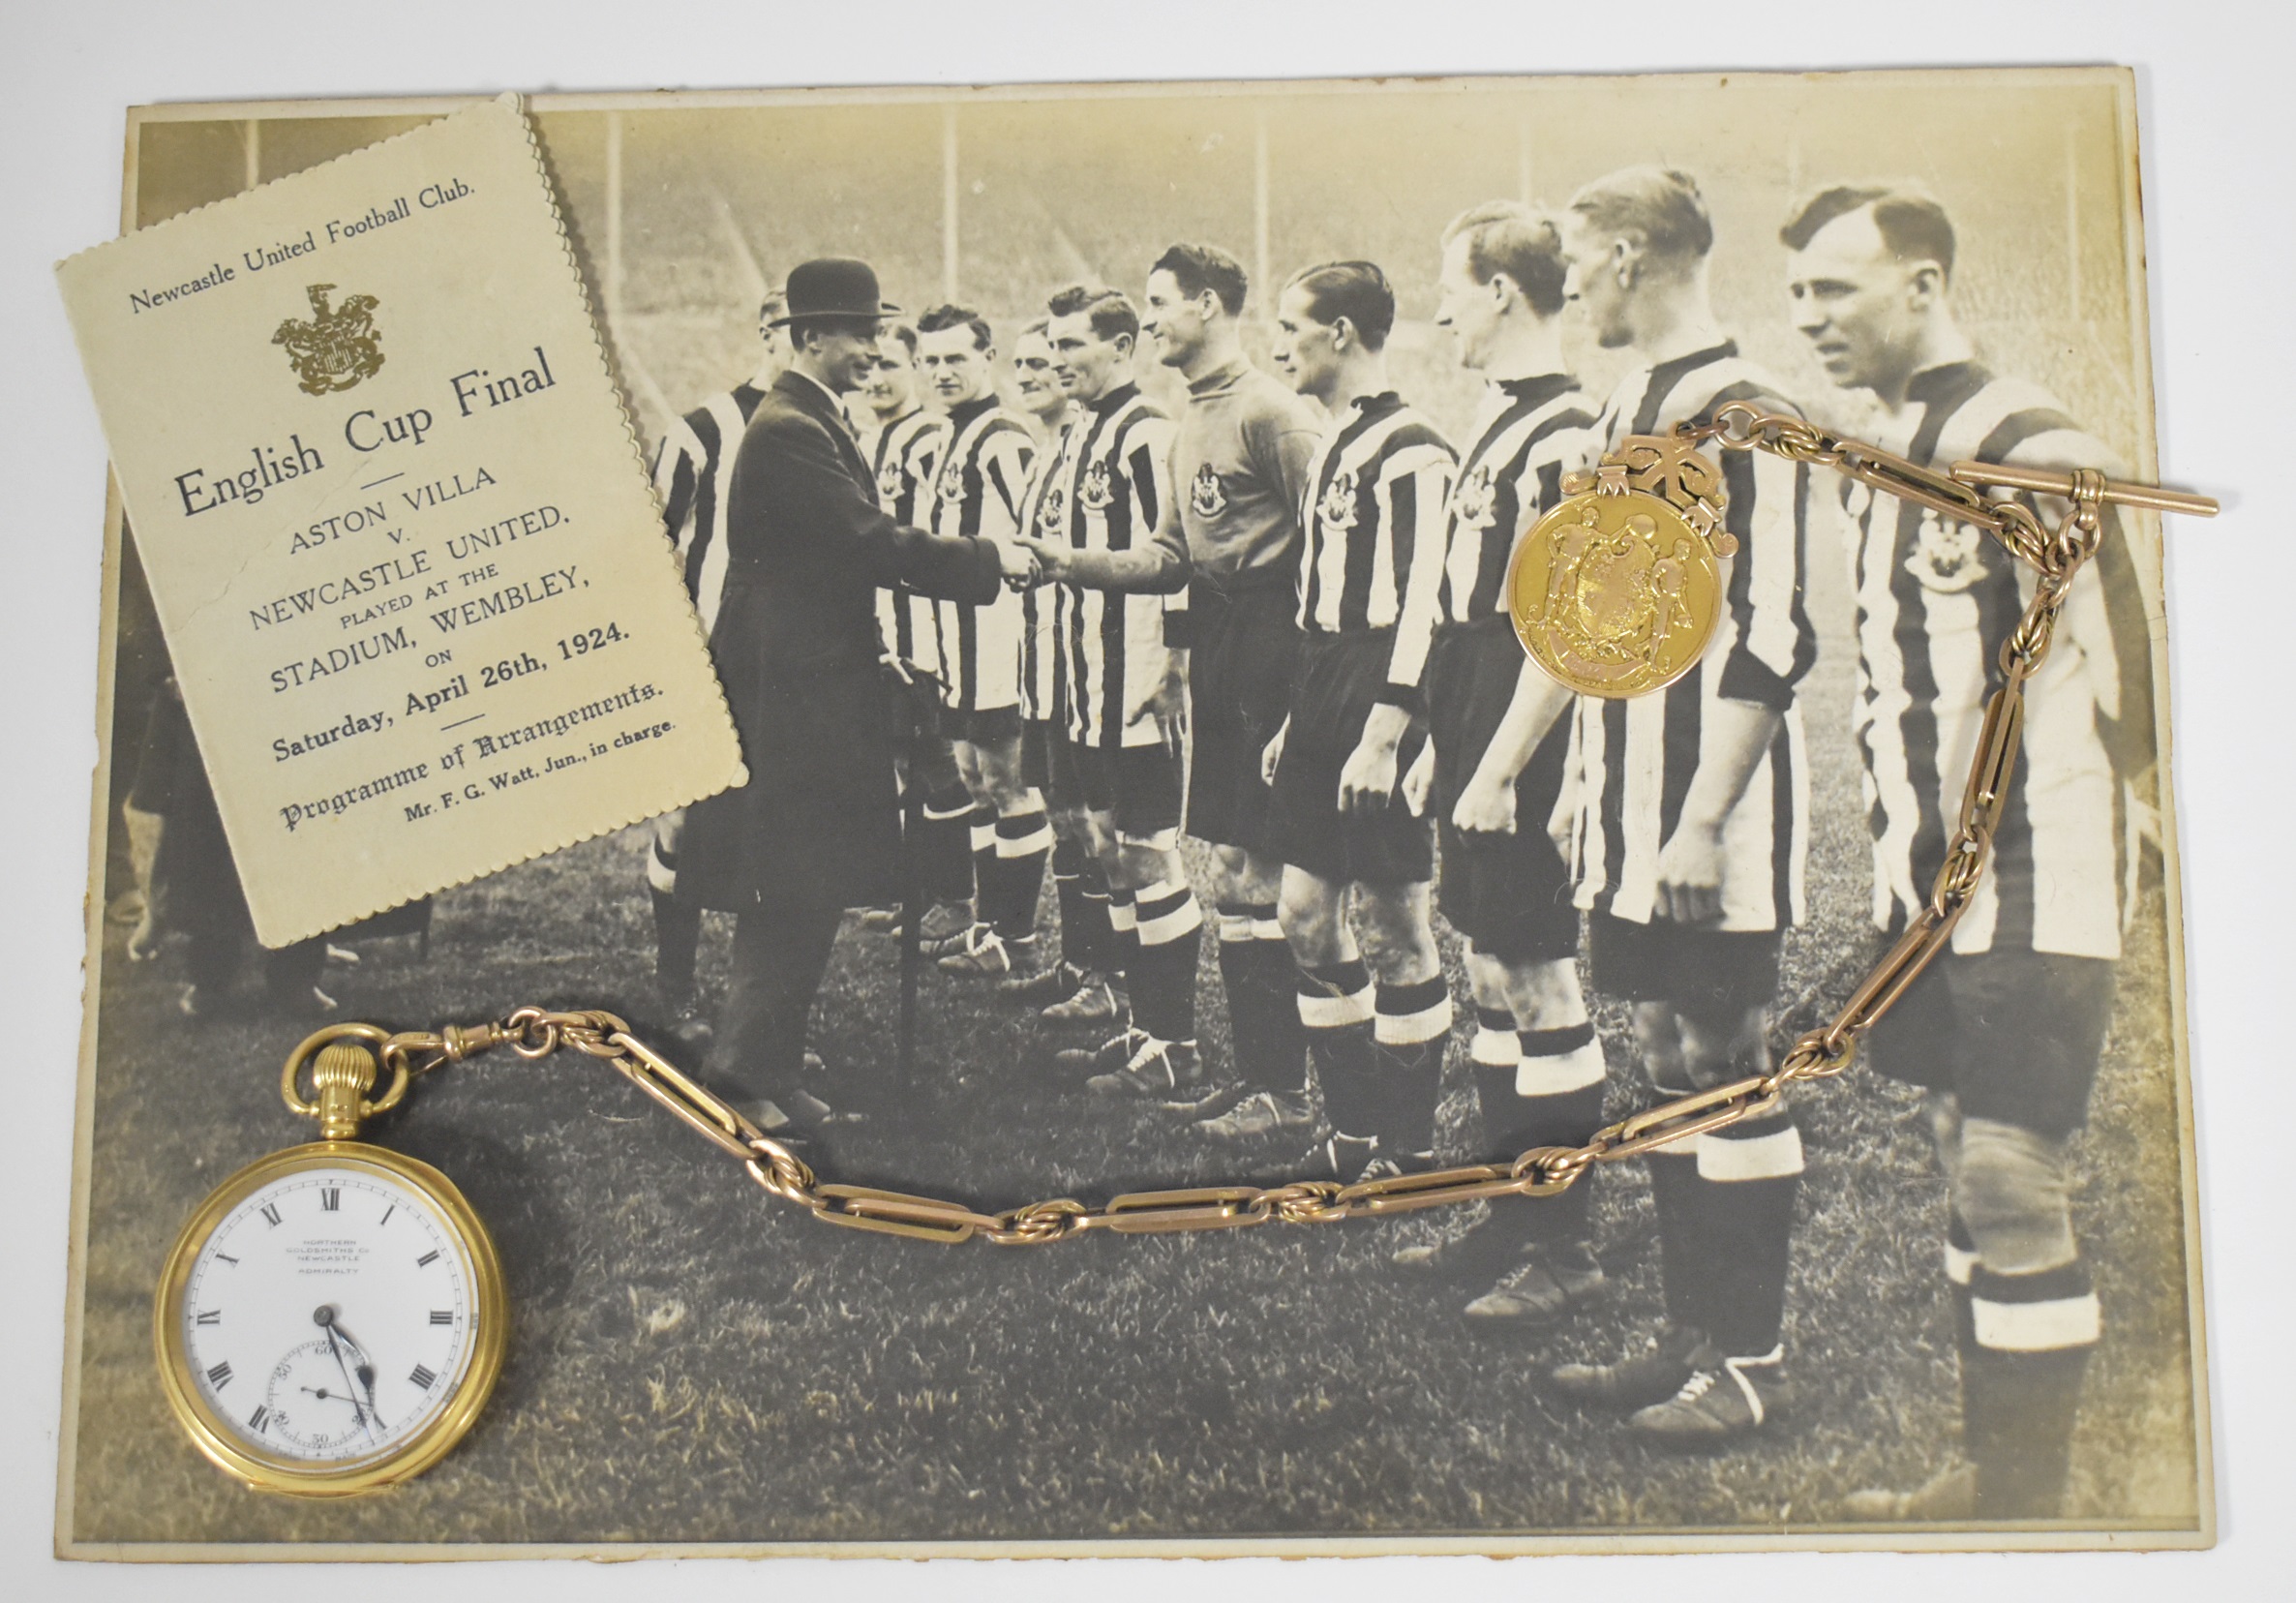 Newcastle FA Cup medal was awarded to keeper Bradley